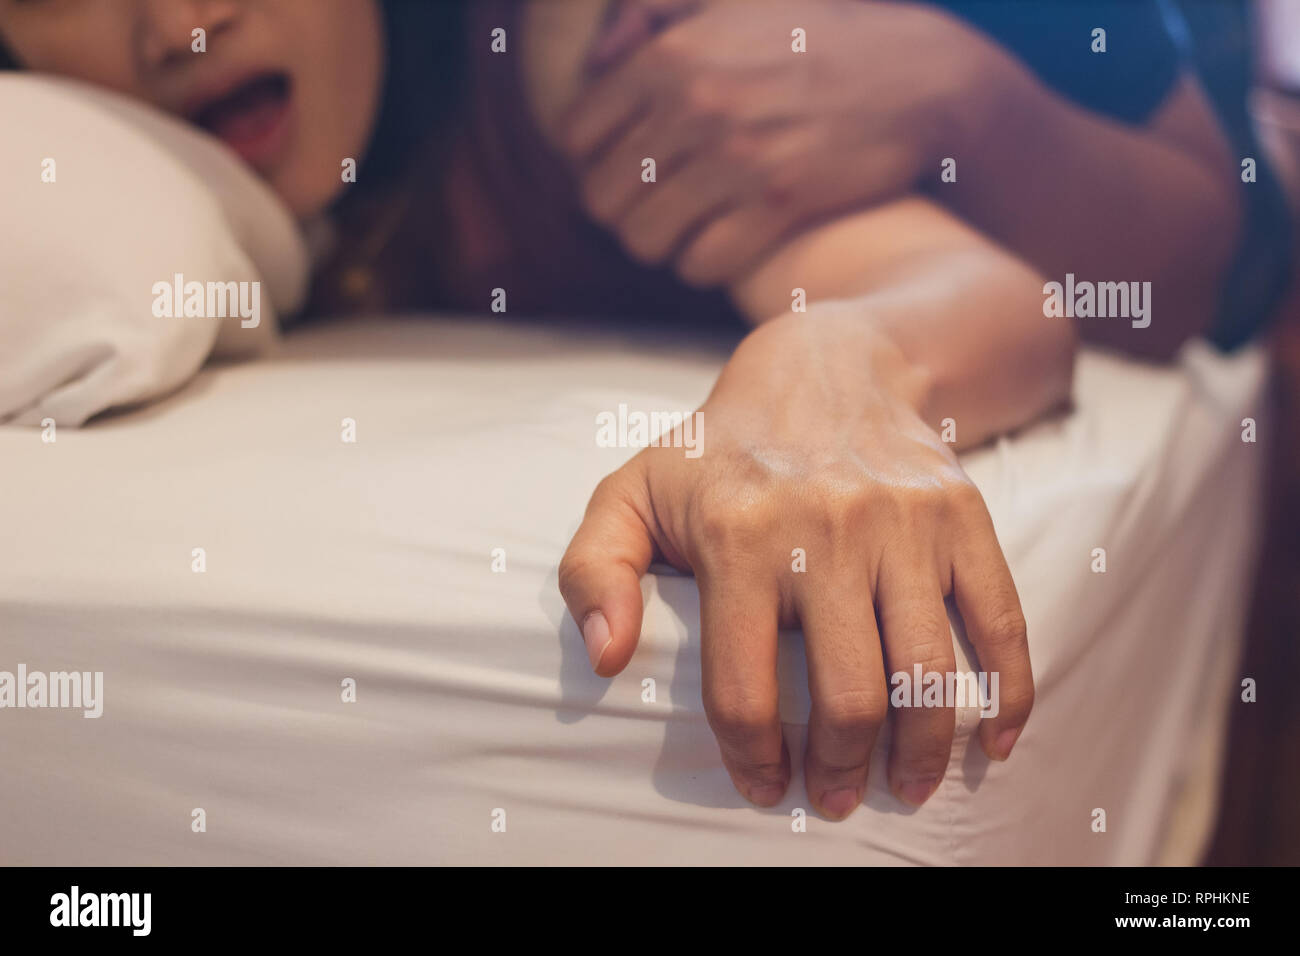 Soft focus on hands of passion couple having sex Stock Photo picture